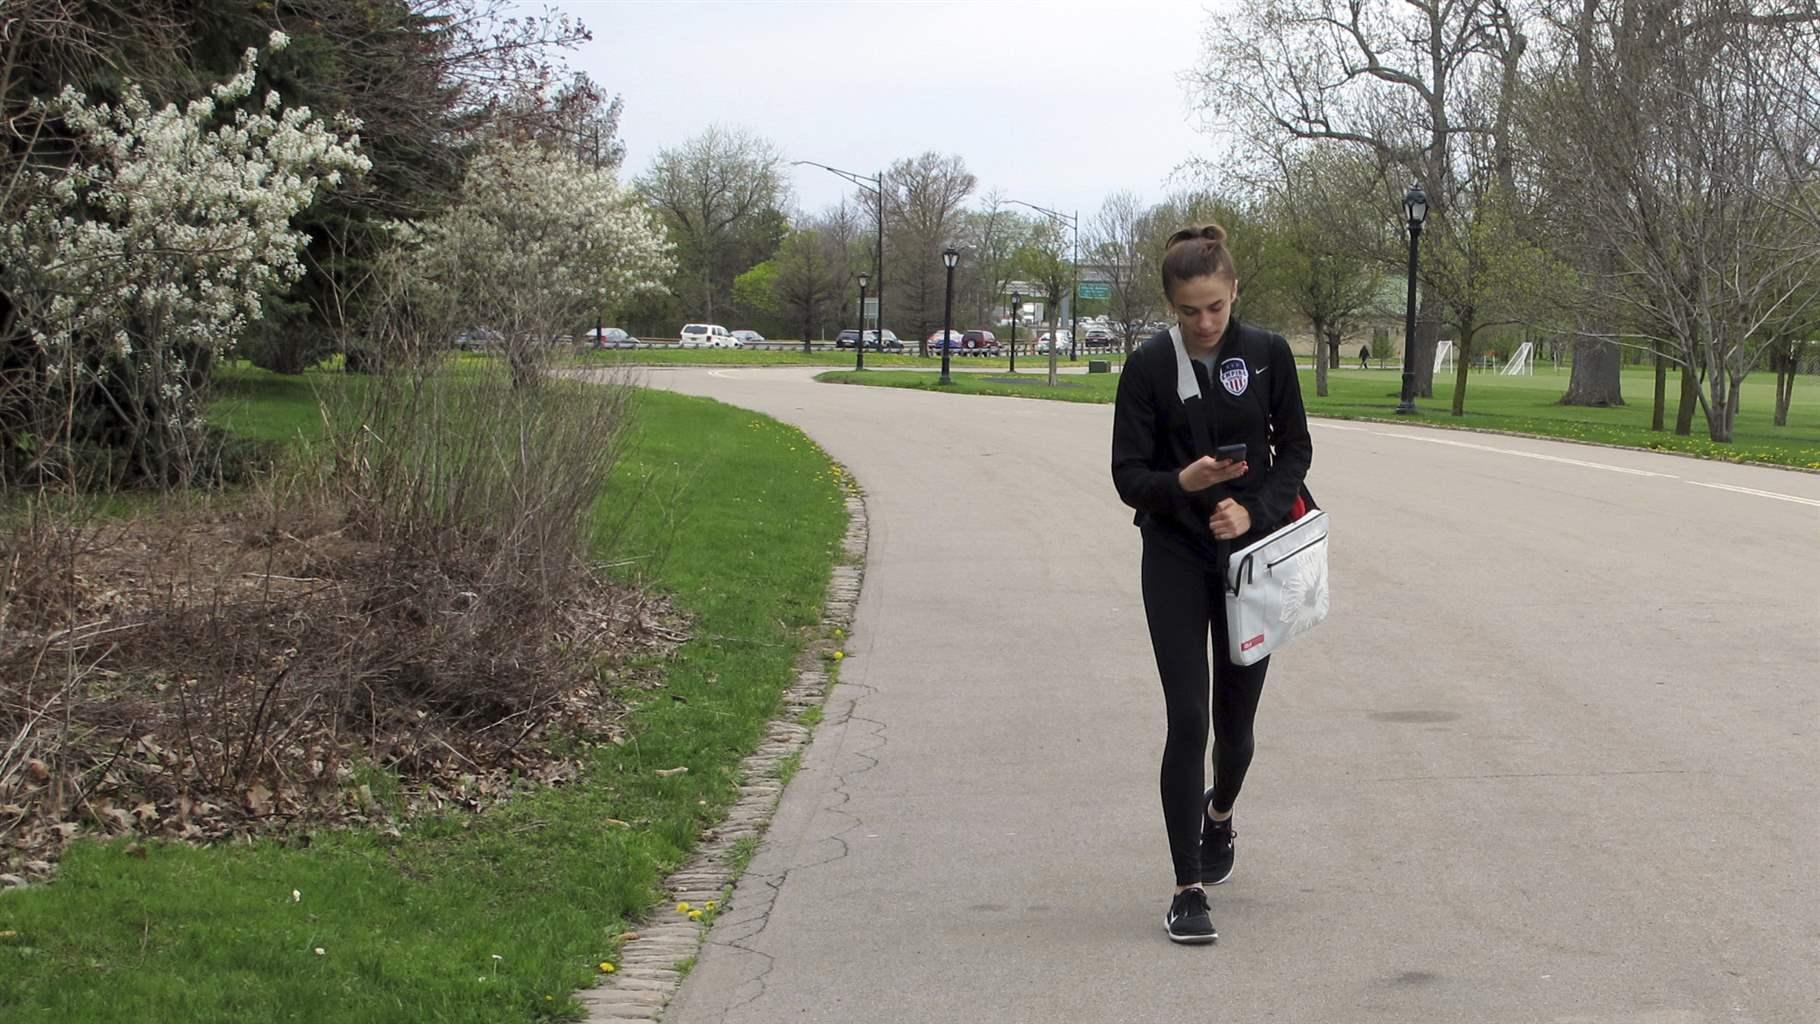 A teenager looks at her cellphone while walking through a park in Buffalo, N.Y.